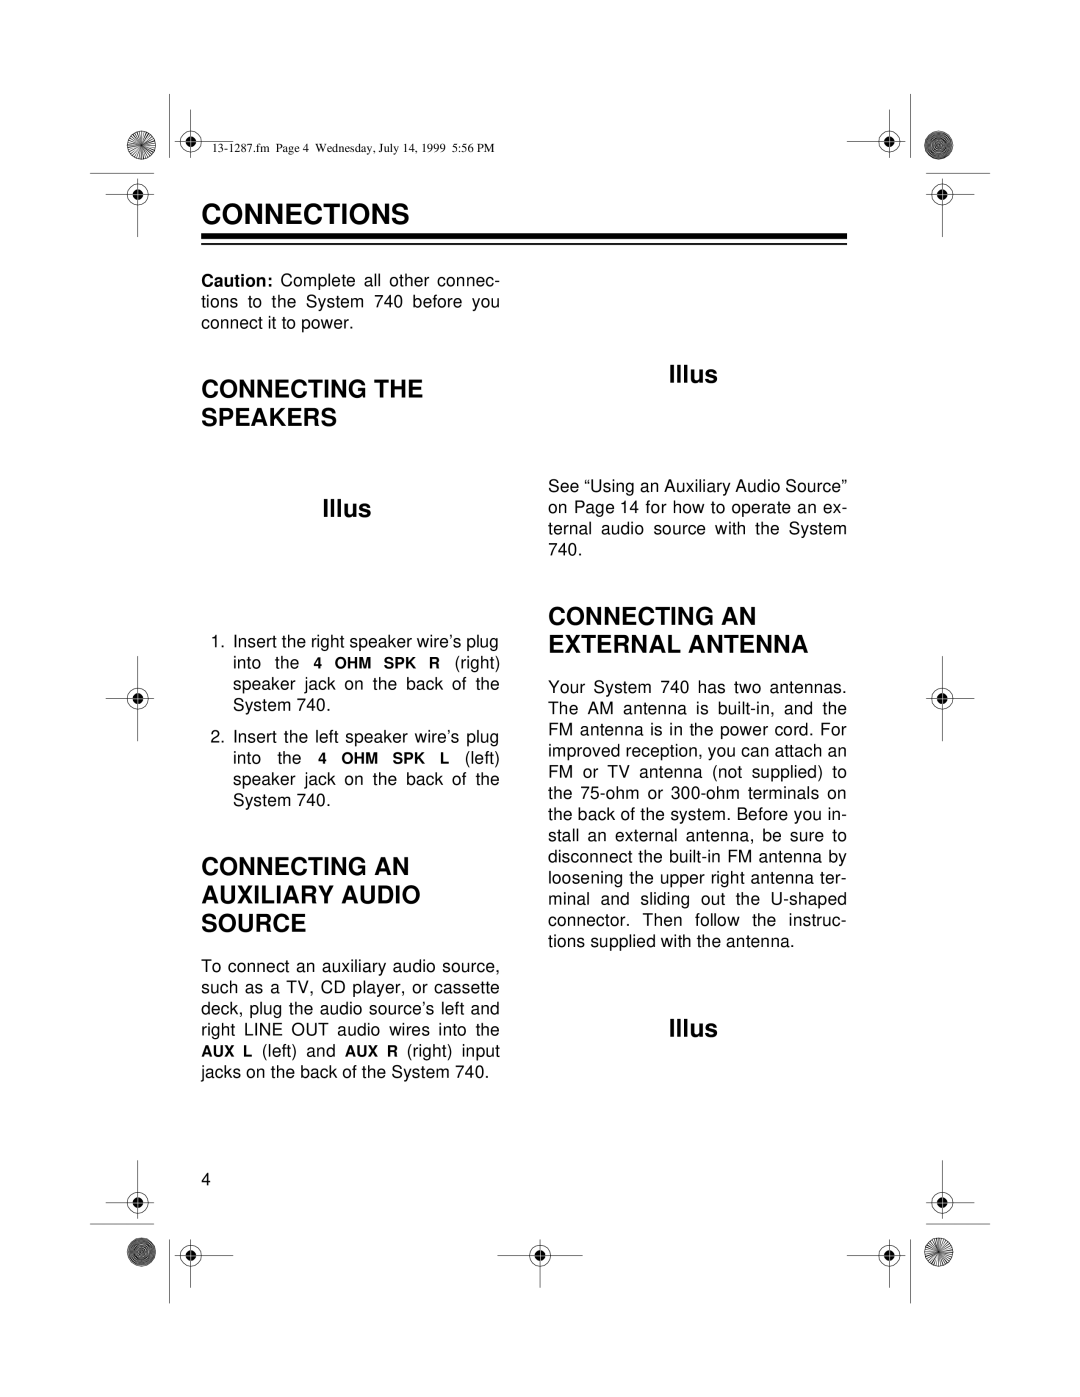 Optimus 740 owner manual Connections, CONNECTING THE SPEAKERS Illus, Connecting An Auxiliary Audio Source 